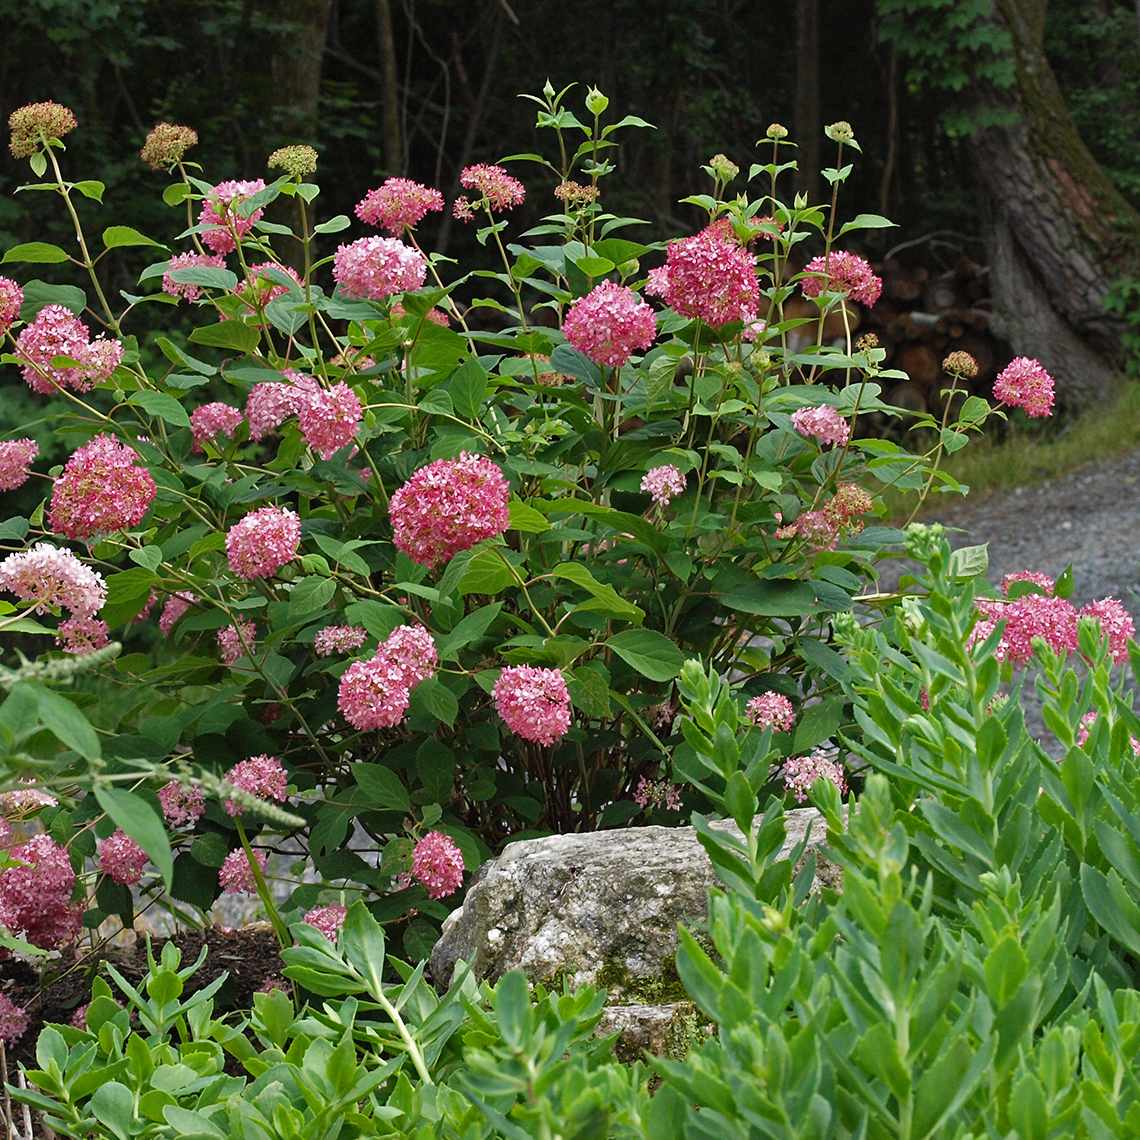 A single Invincibelle Spirit hydrangea in the landscape blooming with pink flowers